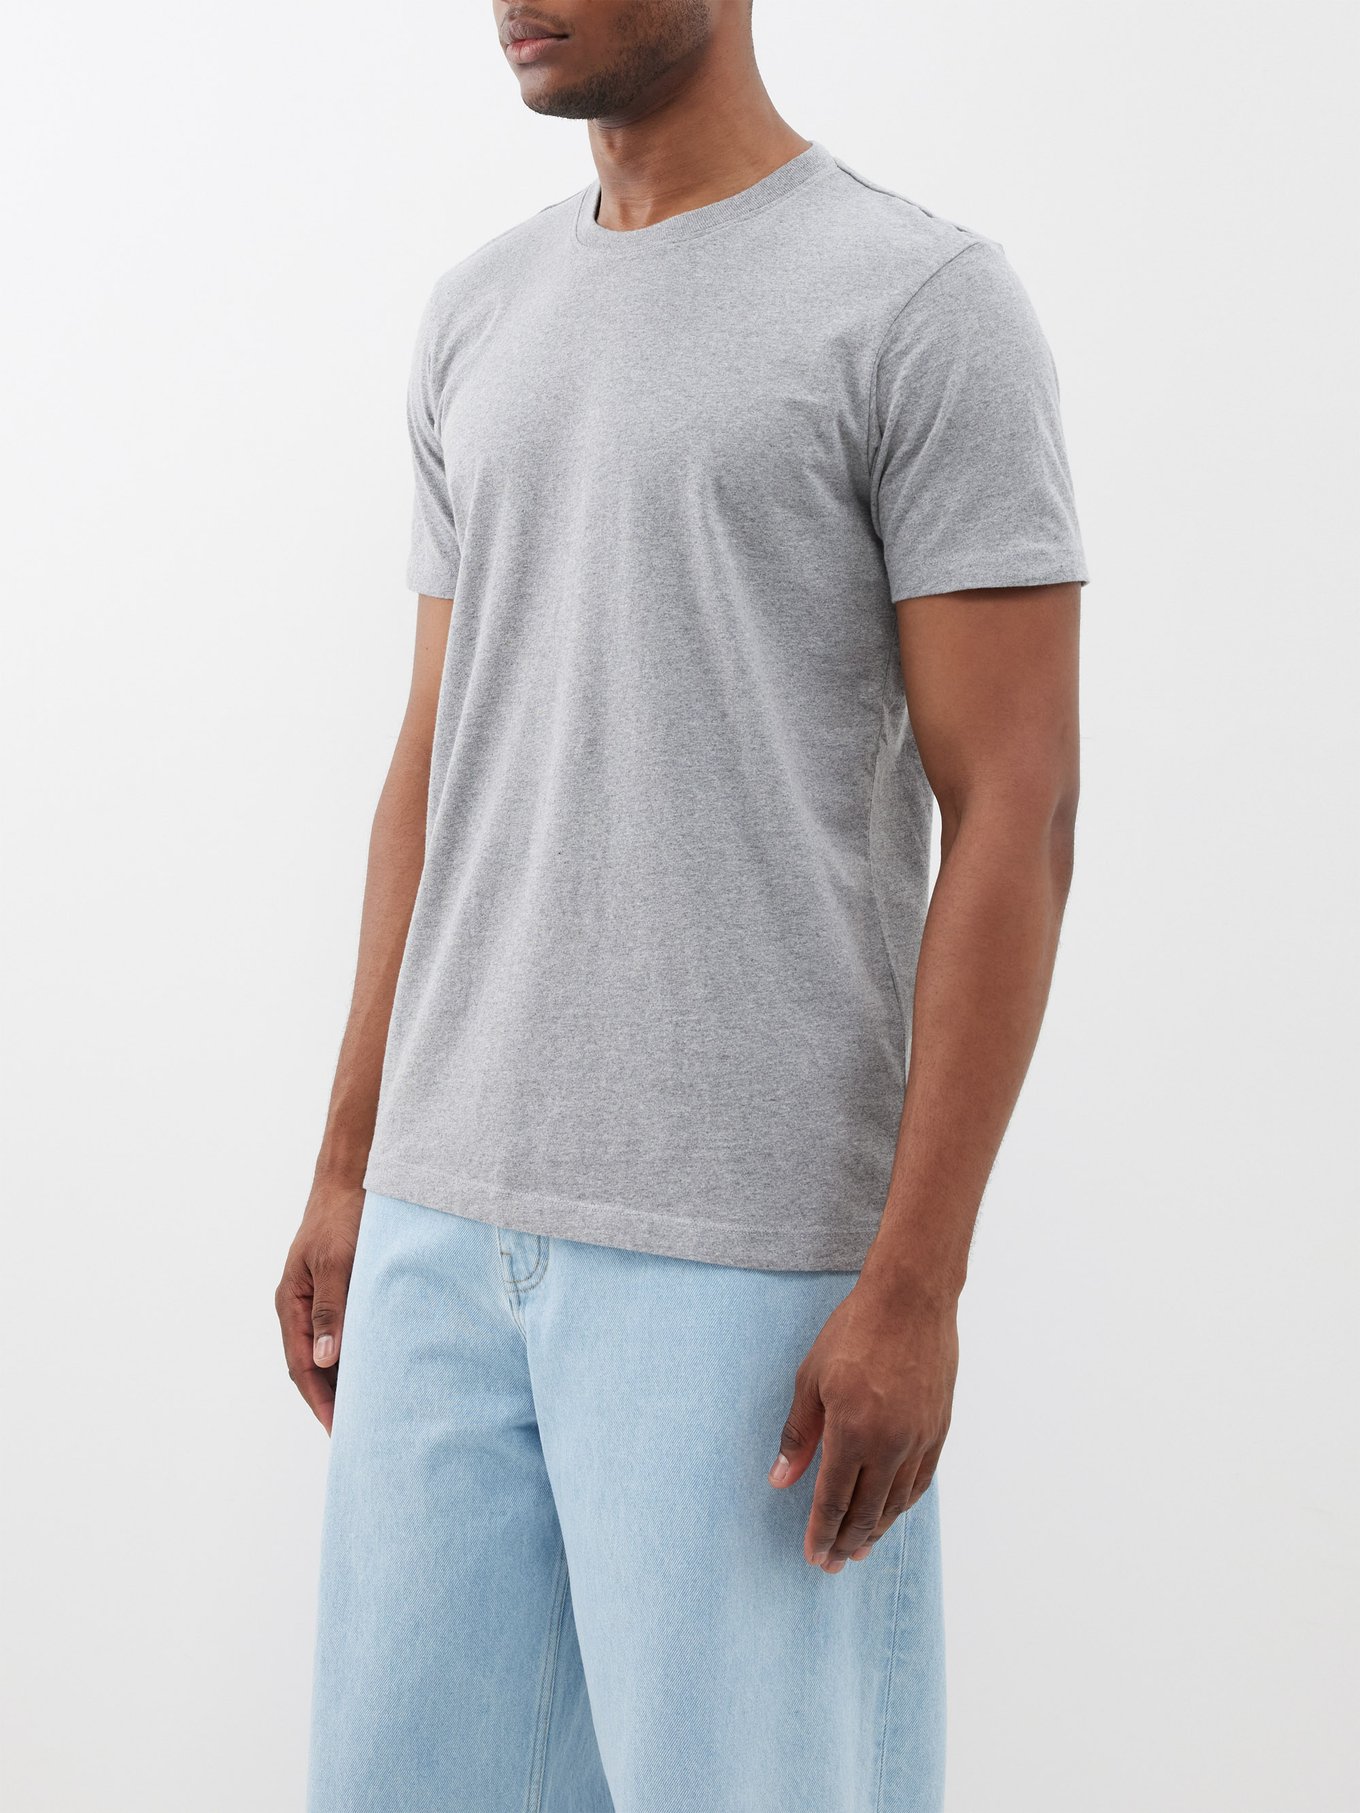 Men's luxury T-Shirt - Amiri T-Shirt in blue cotton with white lettering on  chest